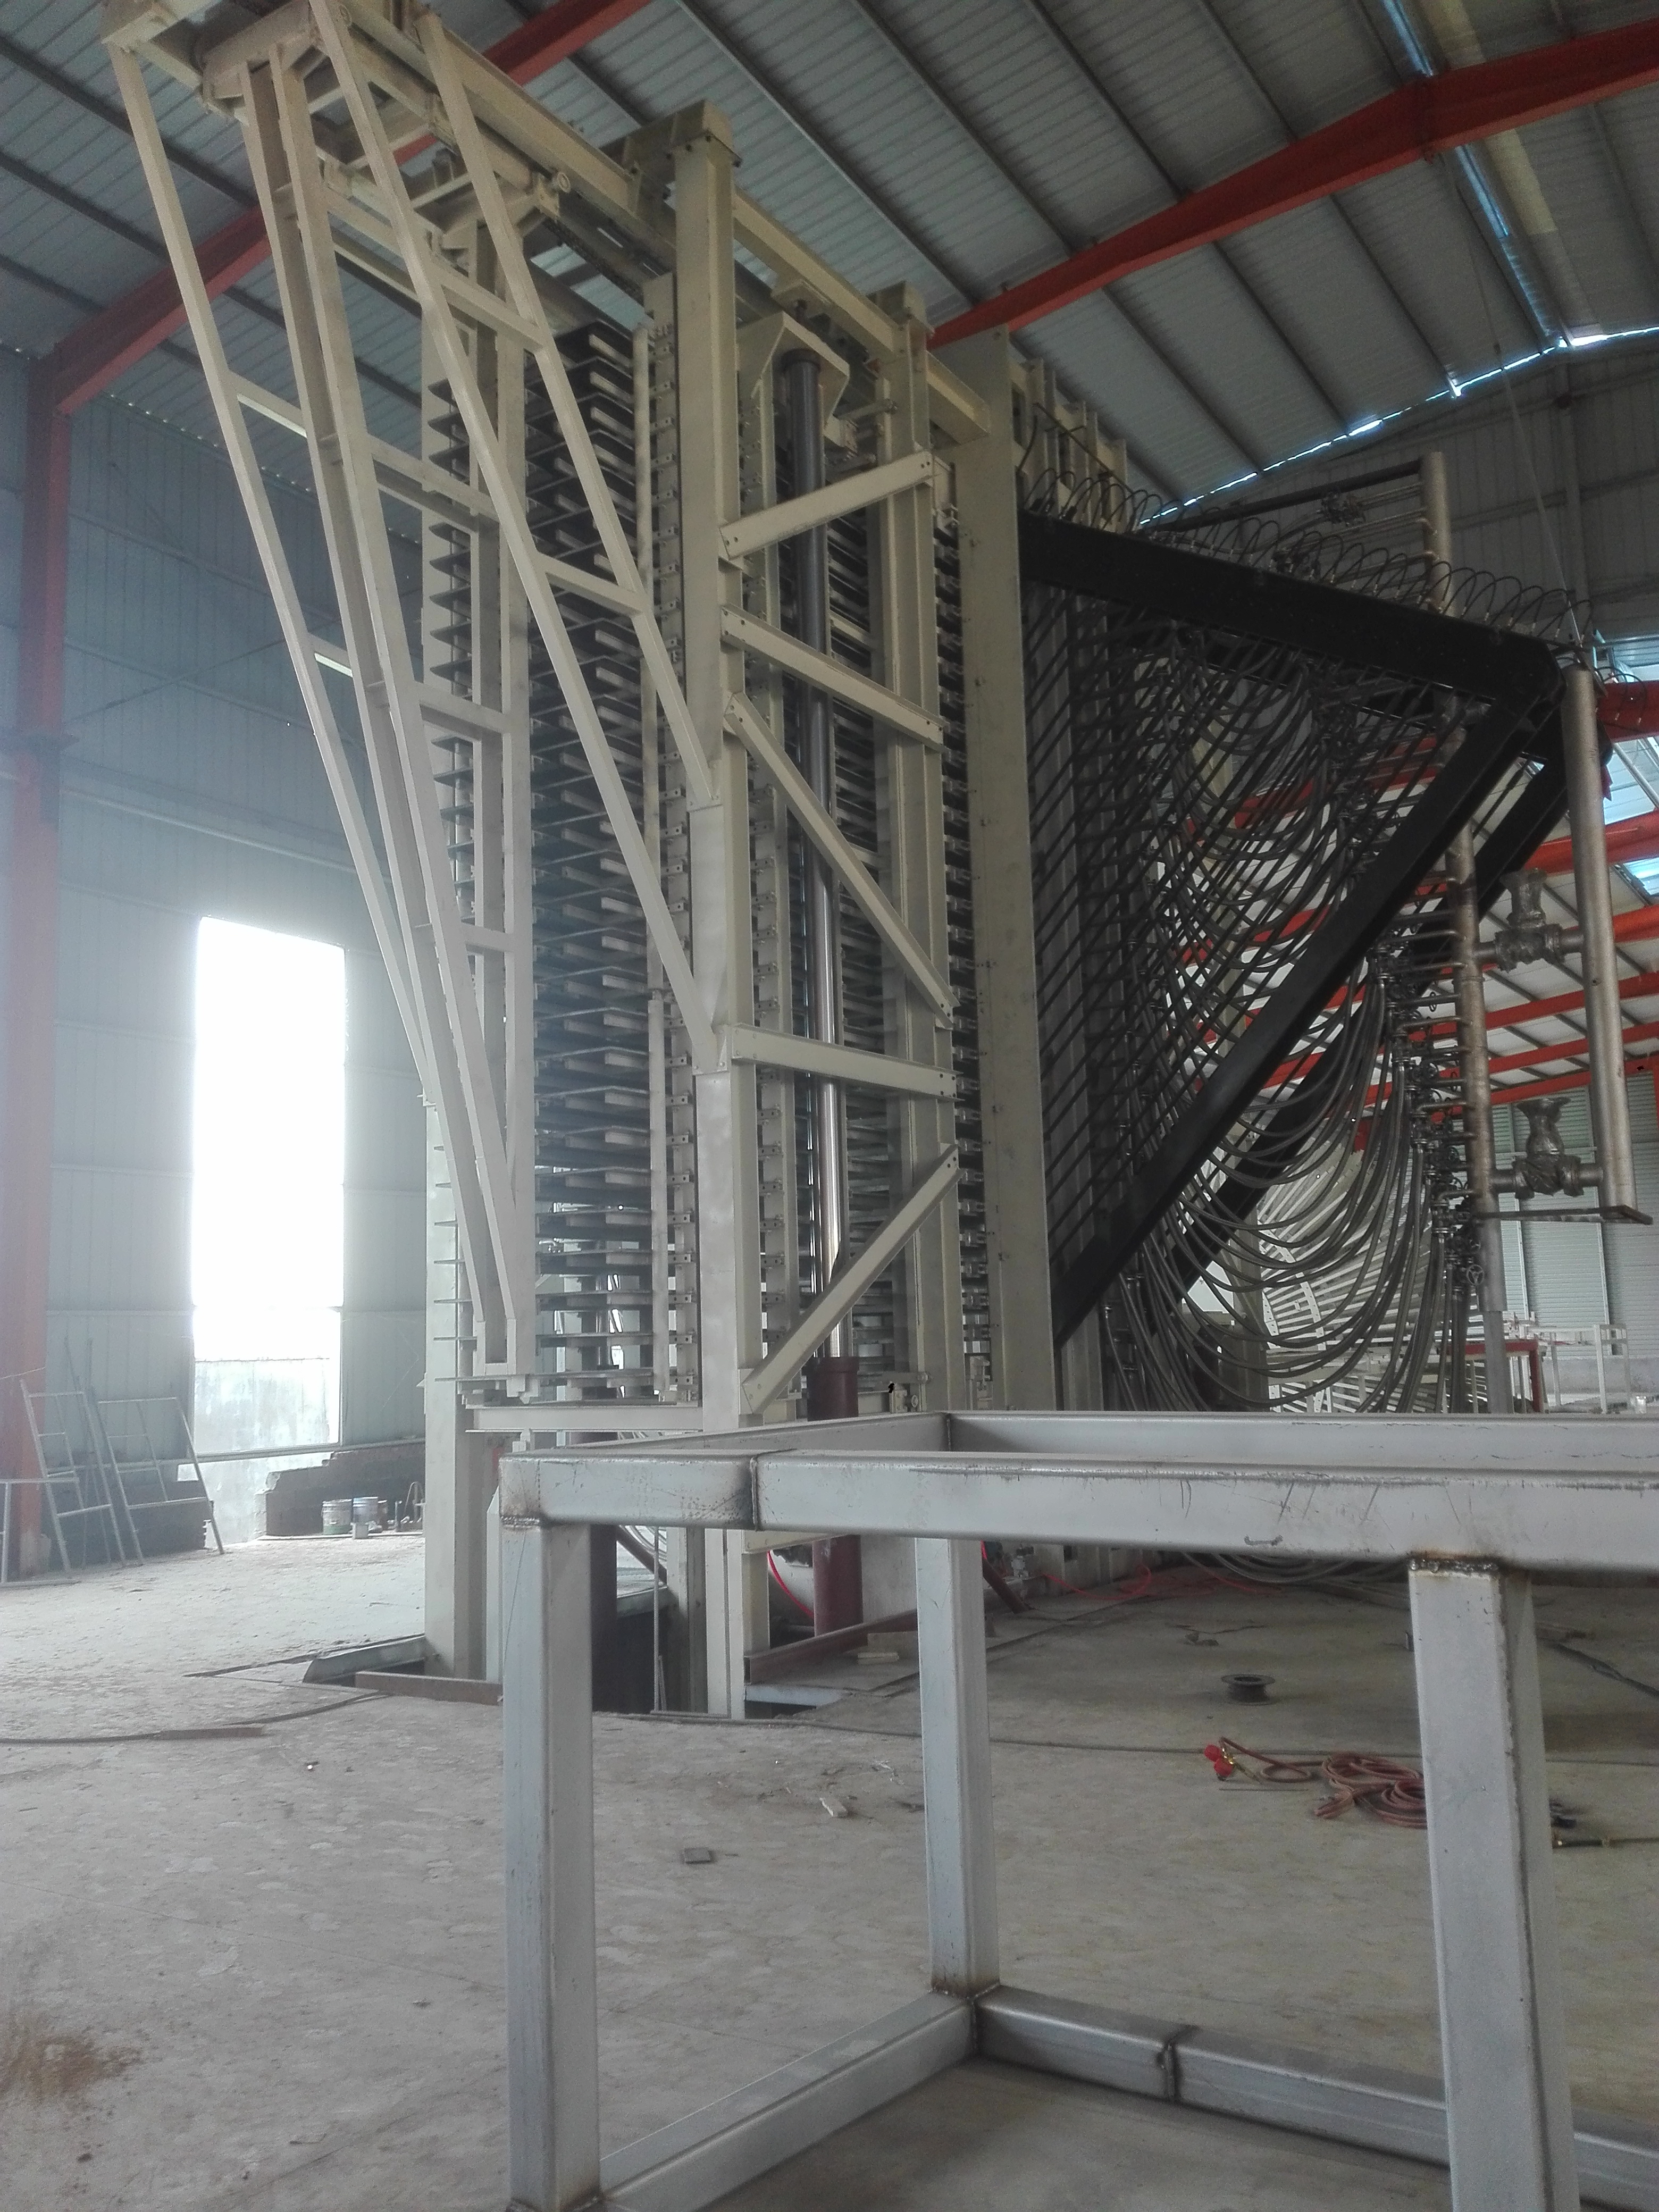 Particle Board Production Osb Making Machine Plywood Production Line Automatic